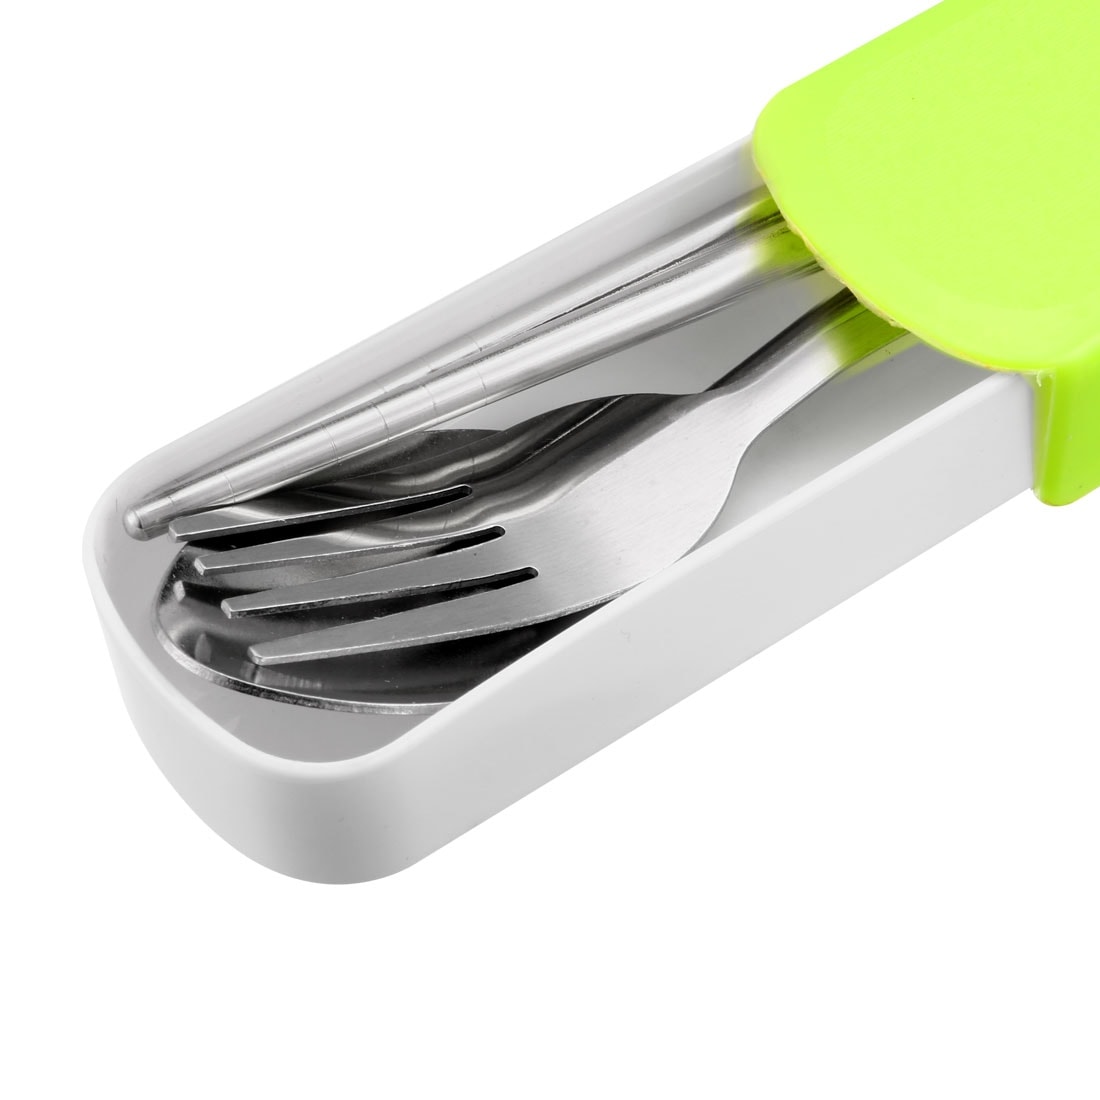 3-in-1 Stainless Steel Fork Spoon Chopsticks Set Portable Utensils with Pen Box - Silver Tone, Green